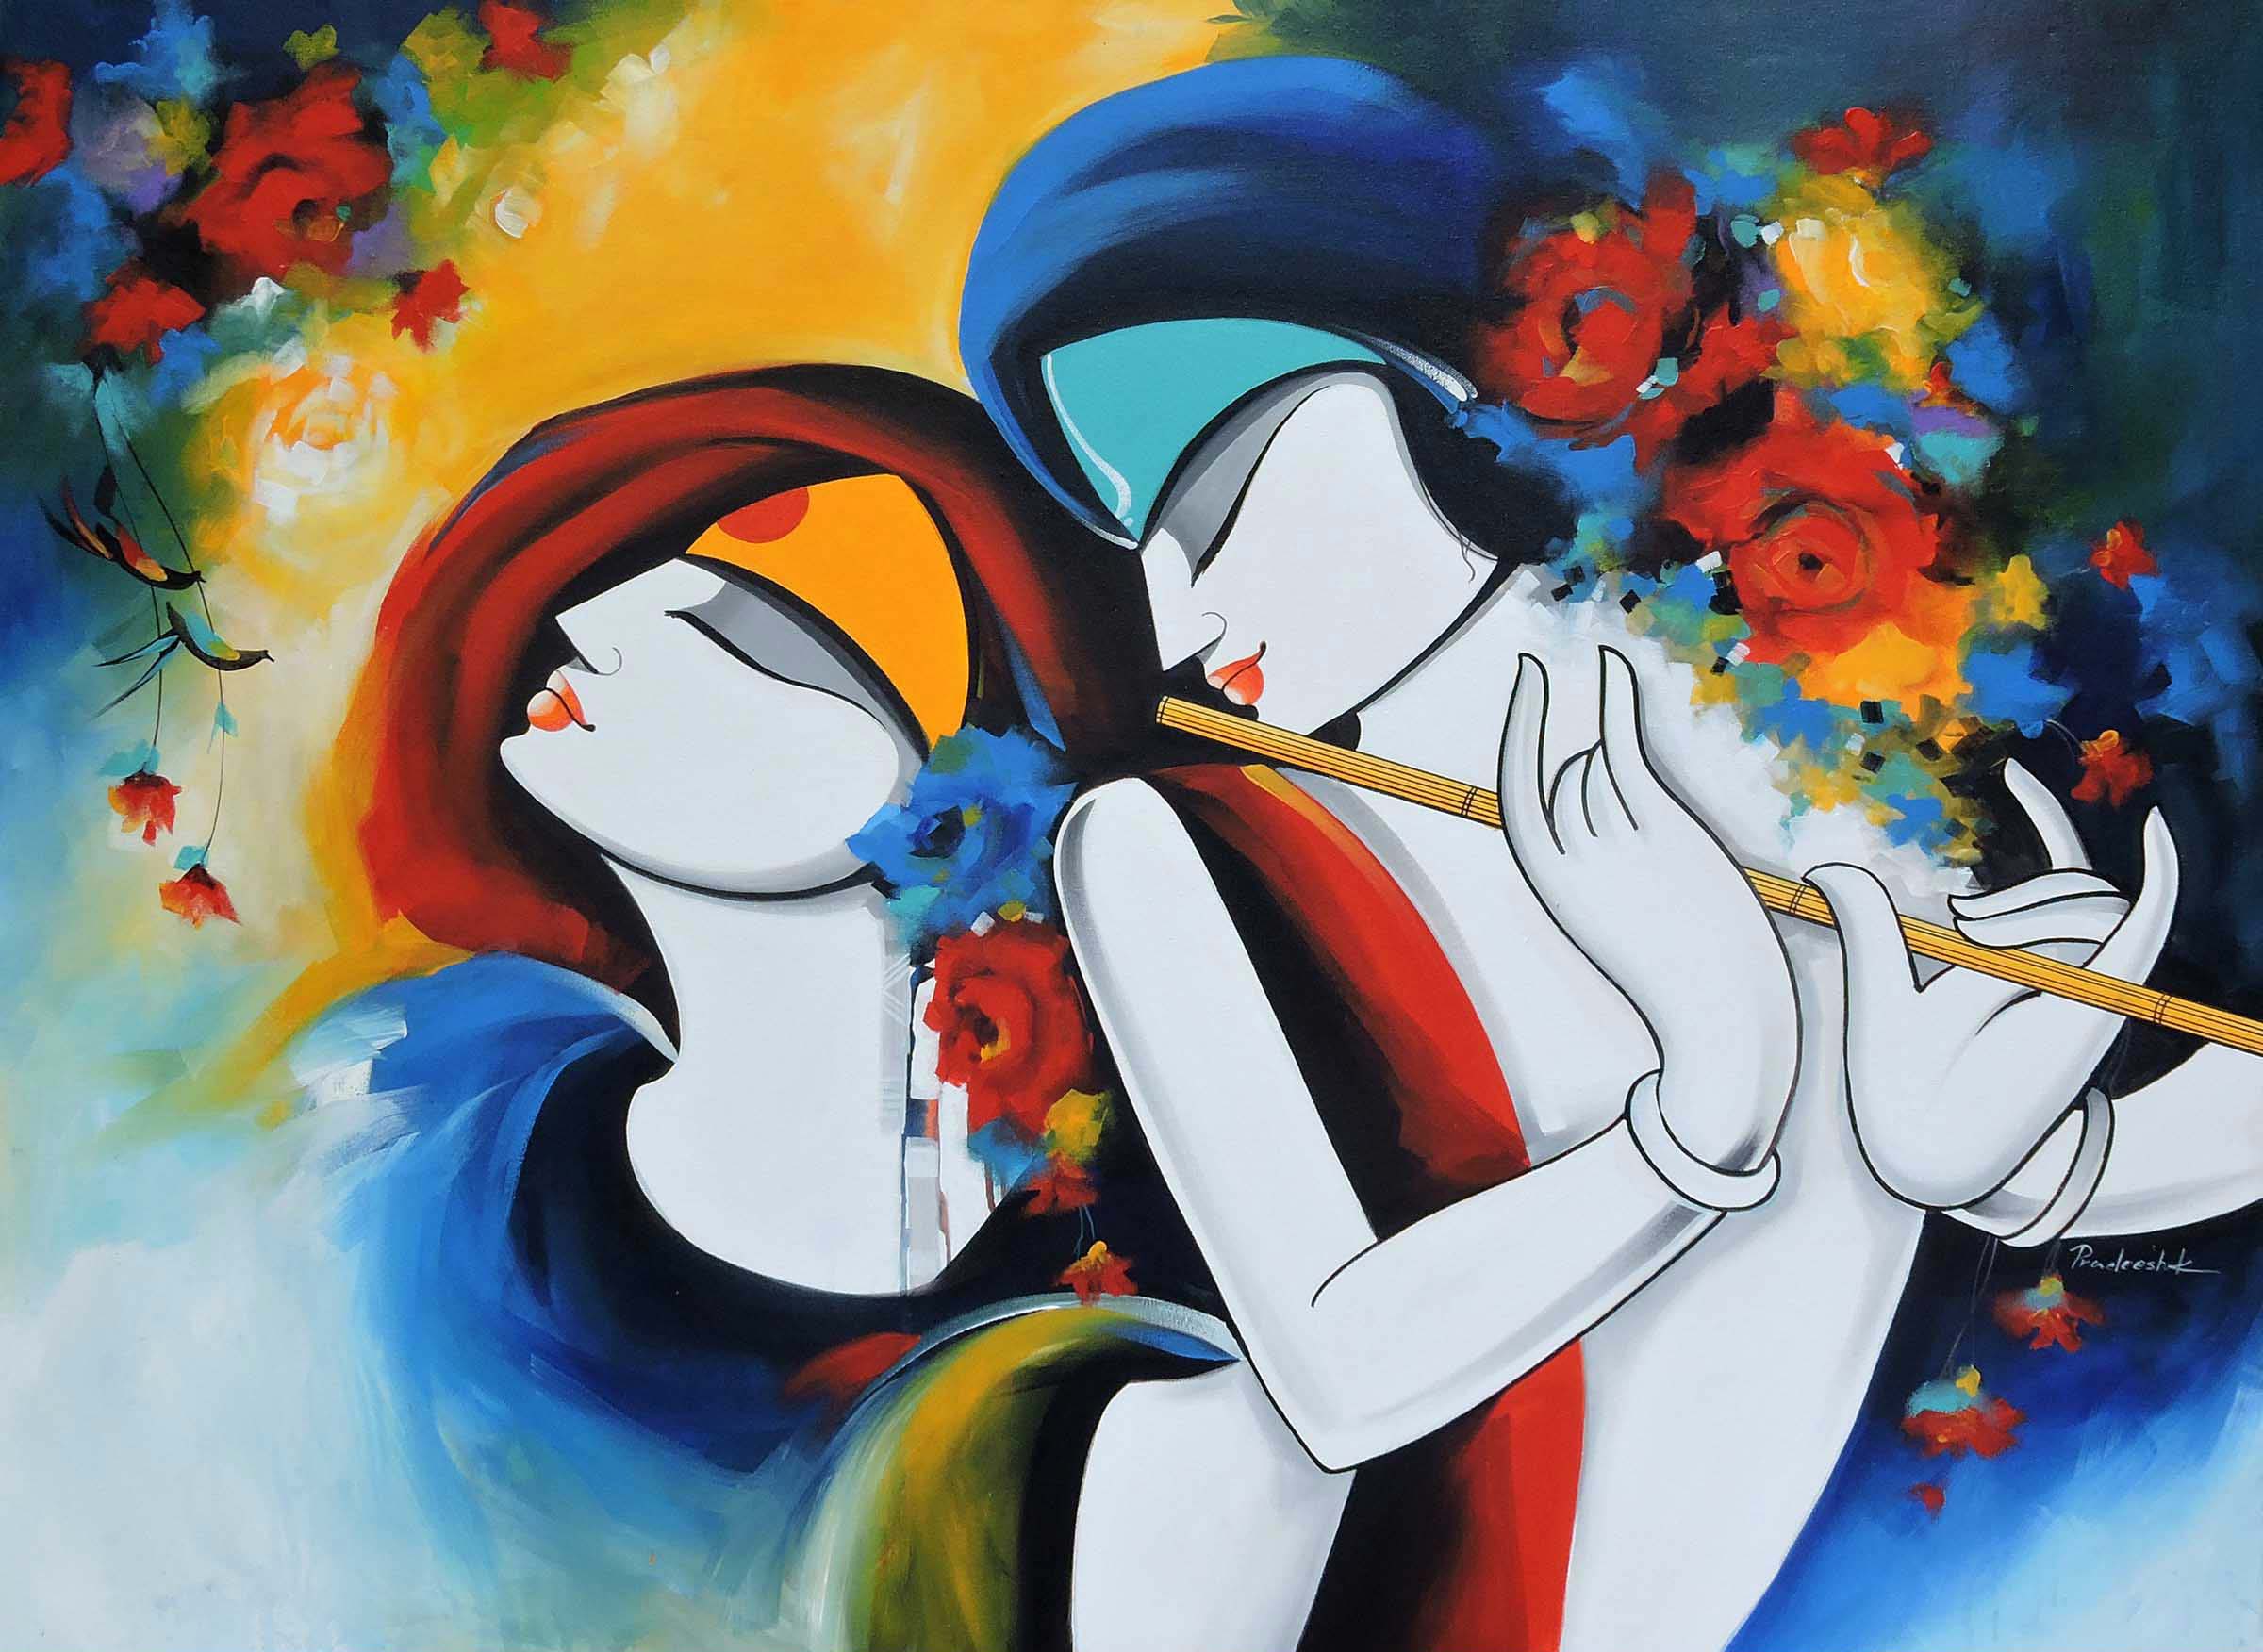 Figurative Painting with Acrylic on Canvas "Tune of Nature" art by Pradeesh K Raman 